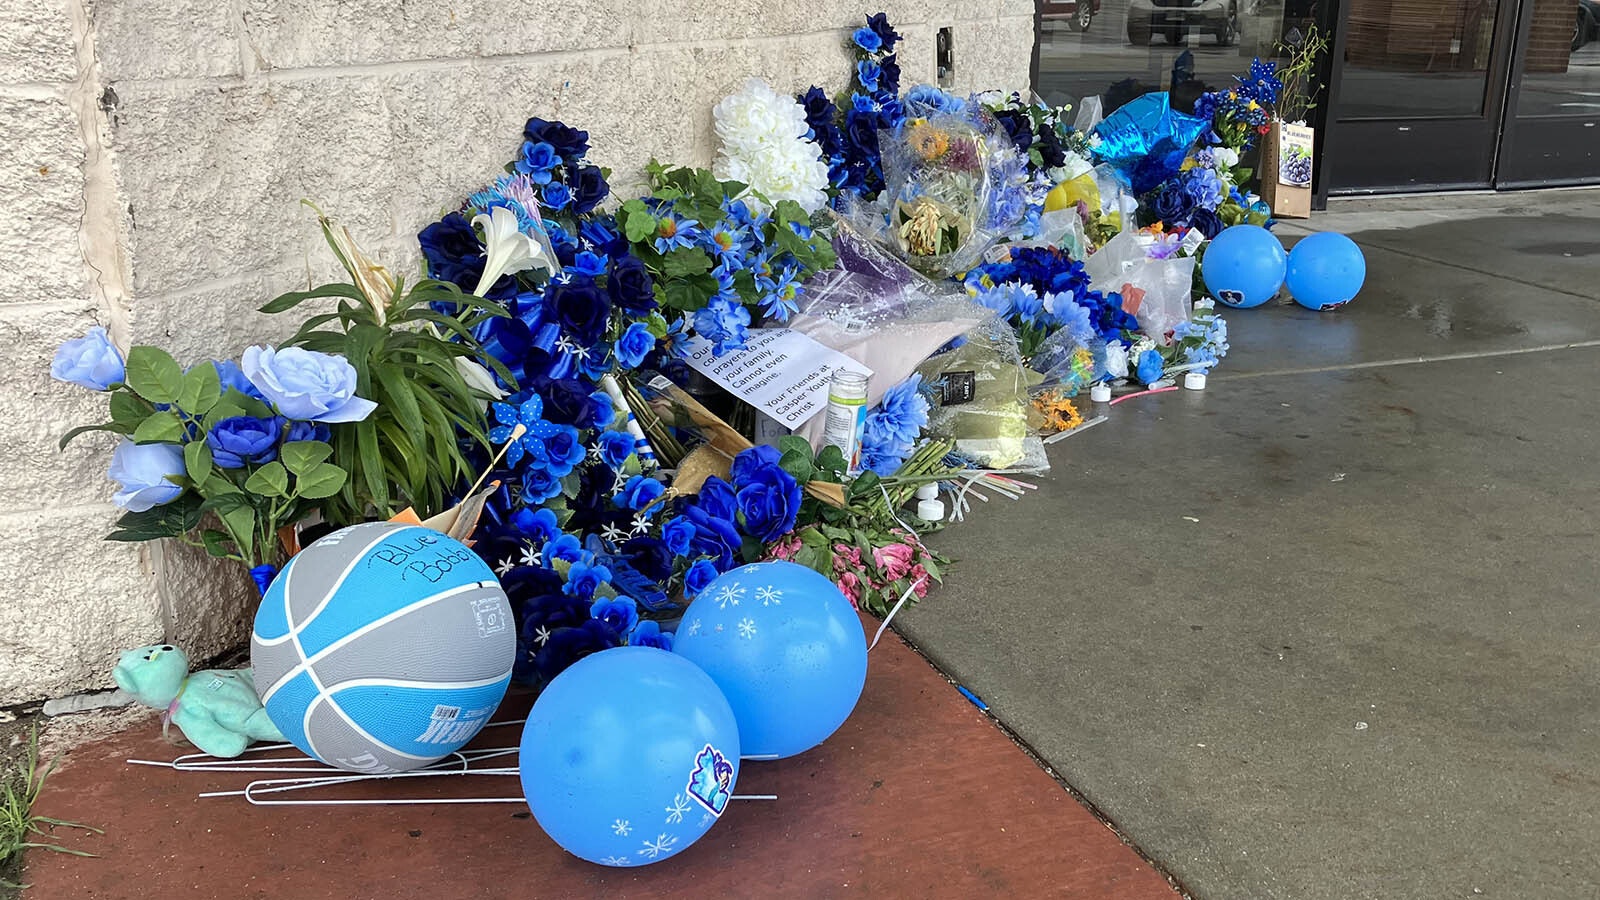 A memorial for Bobby Maher, the Casper 14-year-old who died after being stabbed outside Eastridge Mall on April 7, grows near the spot of the altercation. Maher's favorite color was blue.